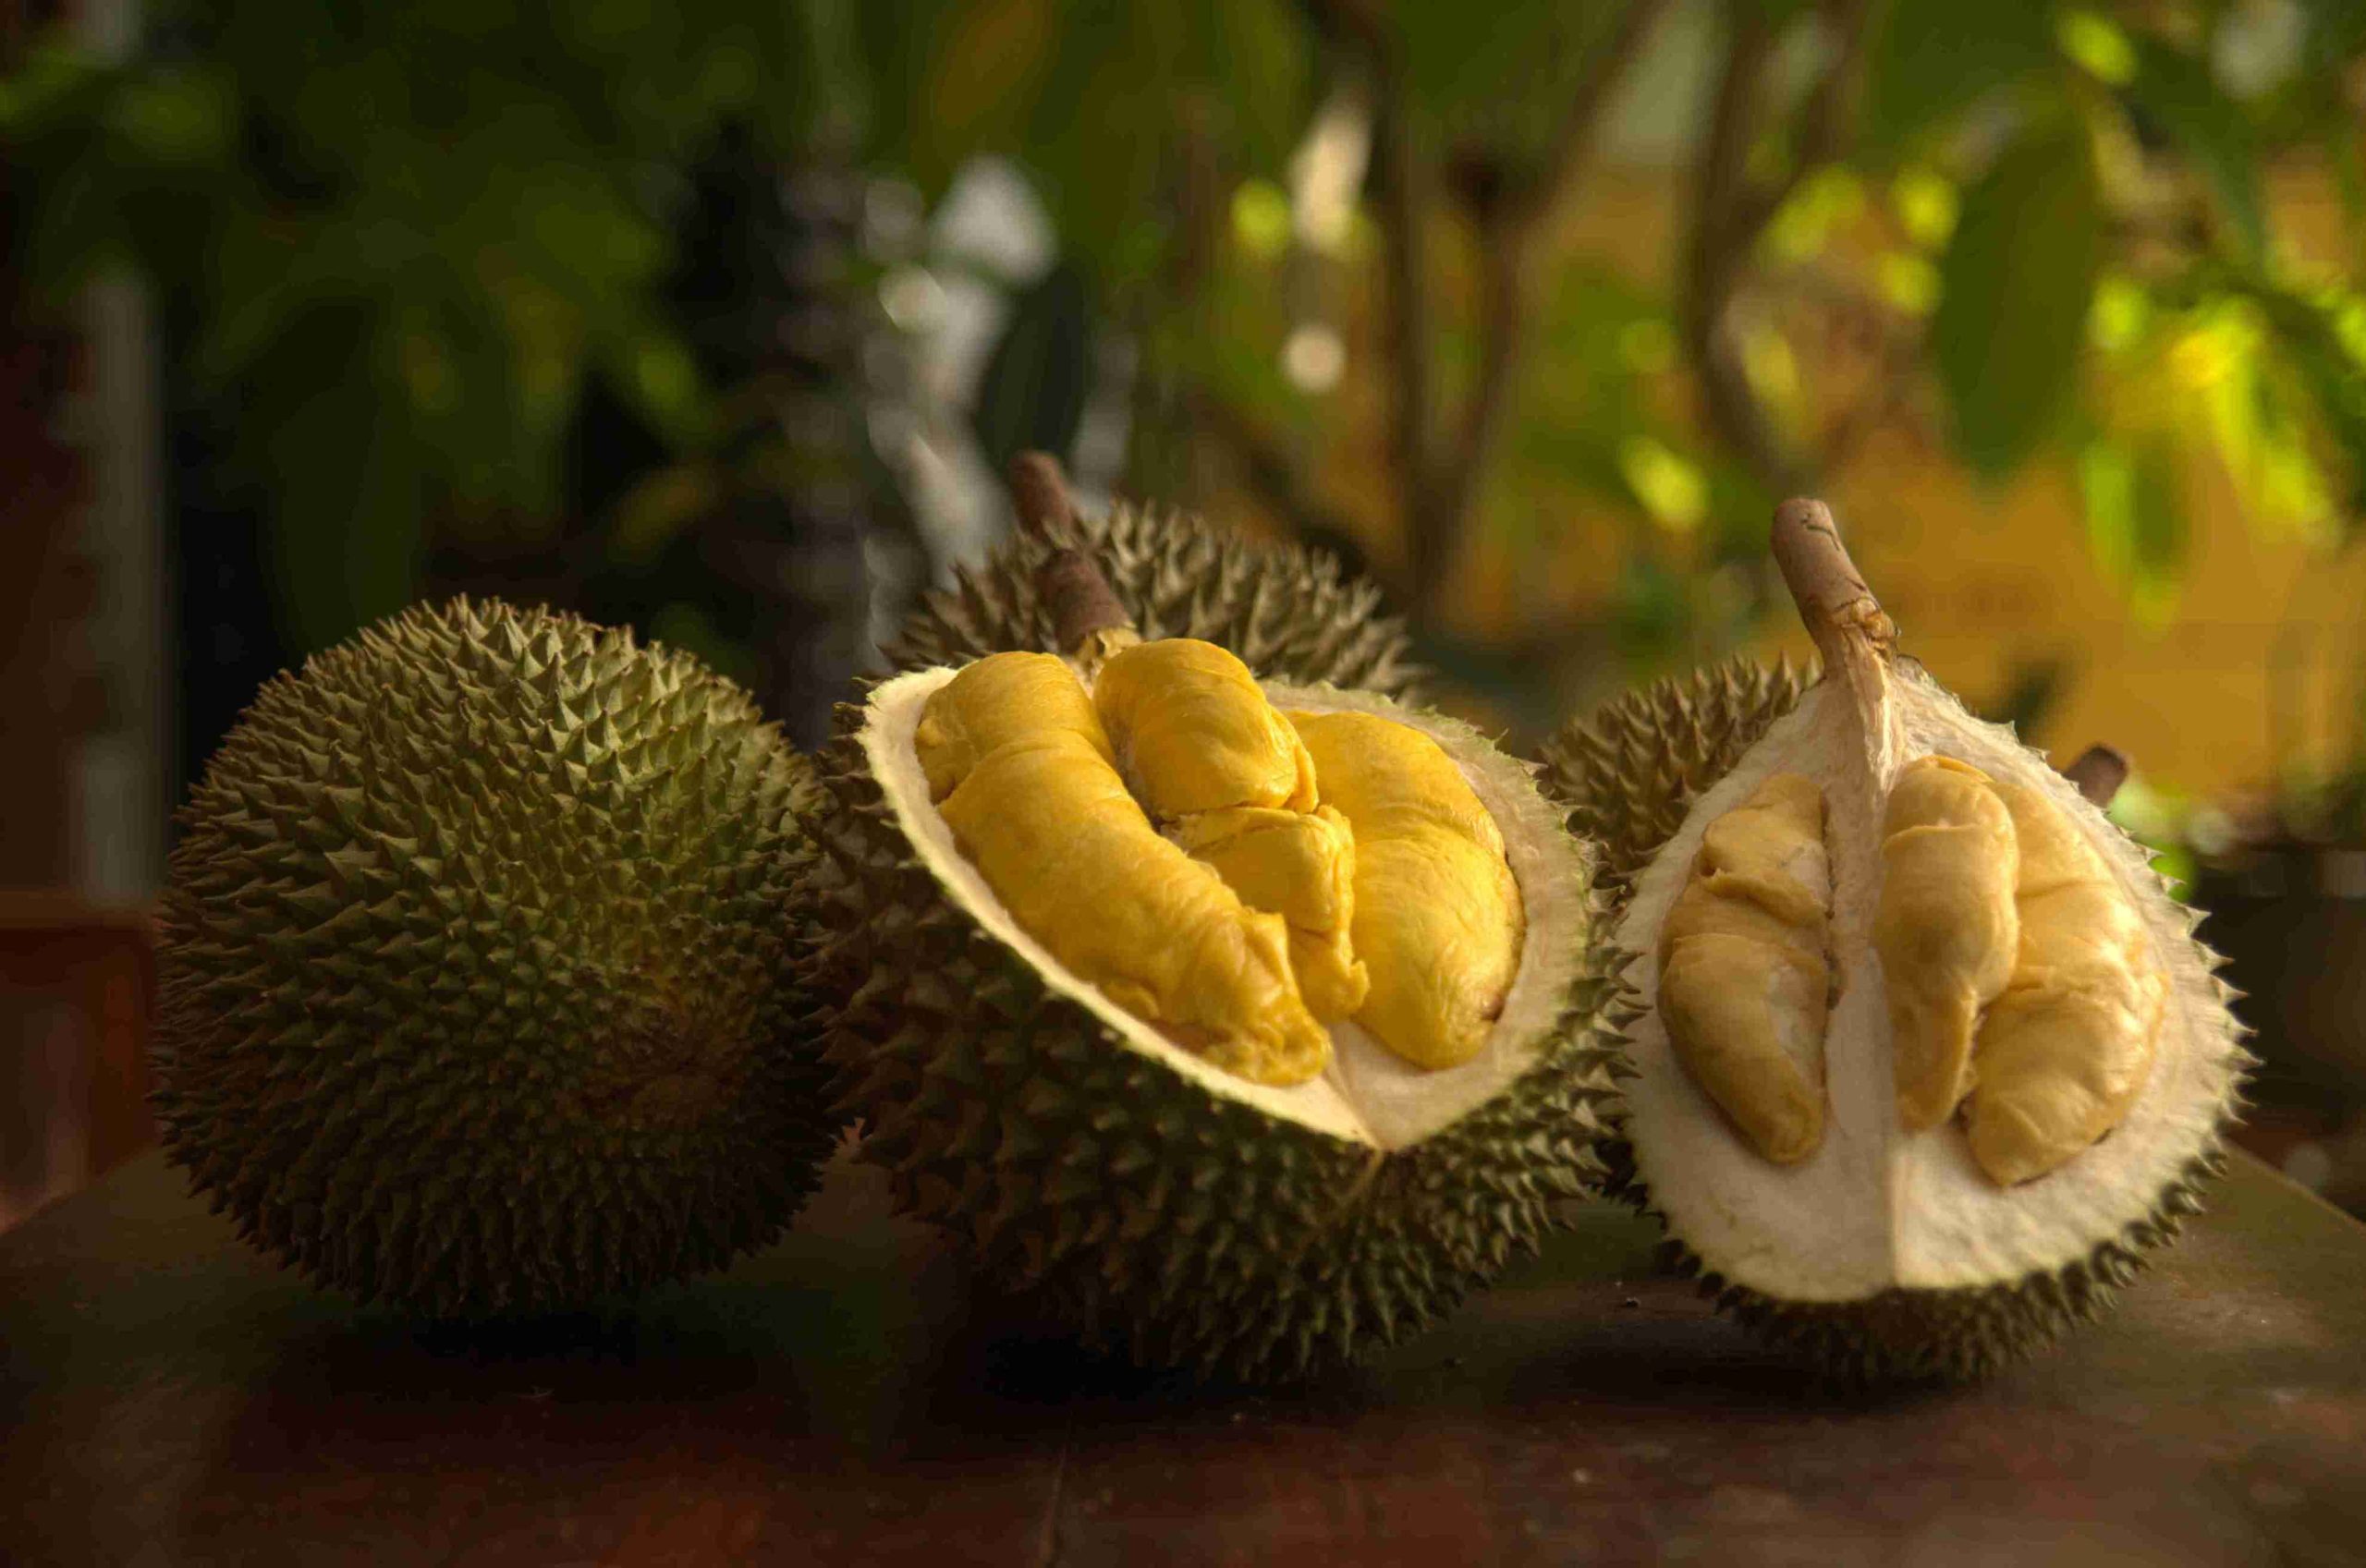 Top Fruits durian - leading durian supplier in Malaysia